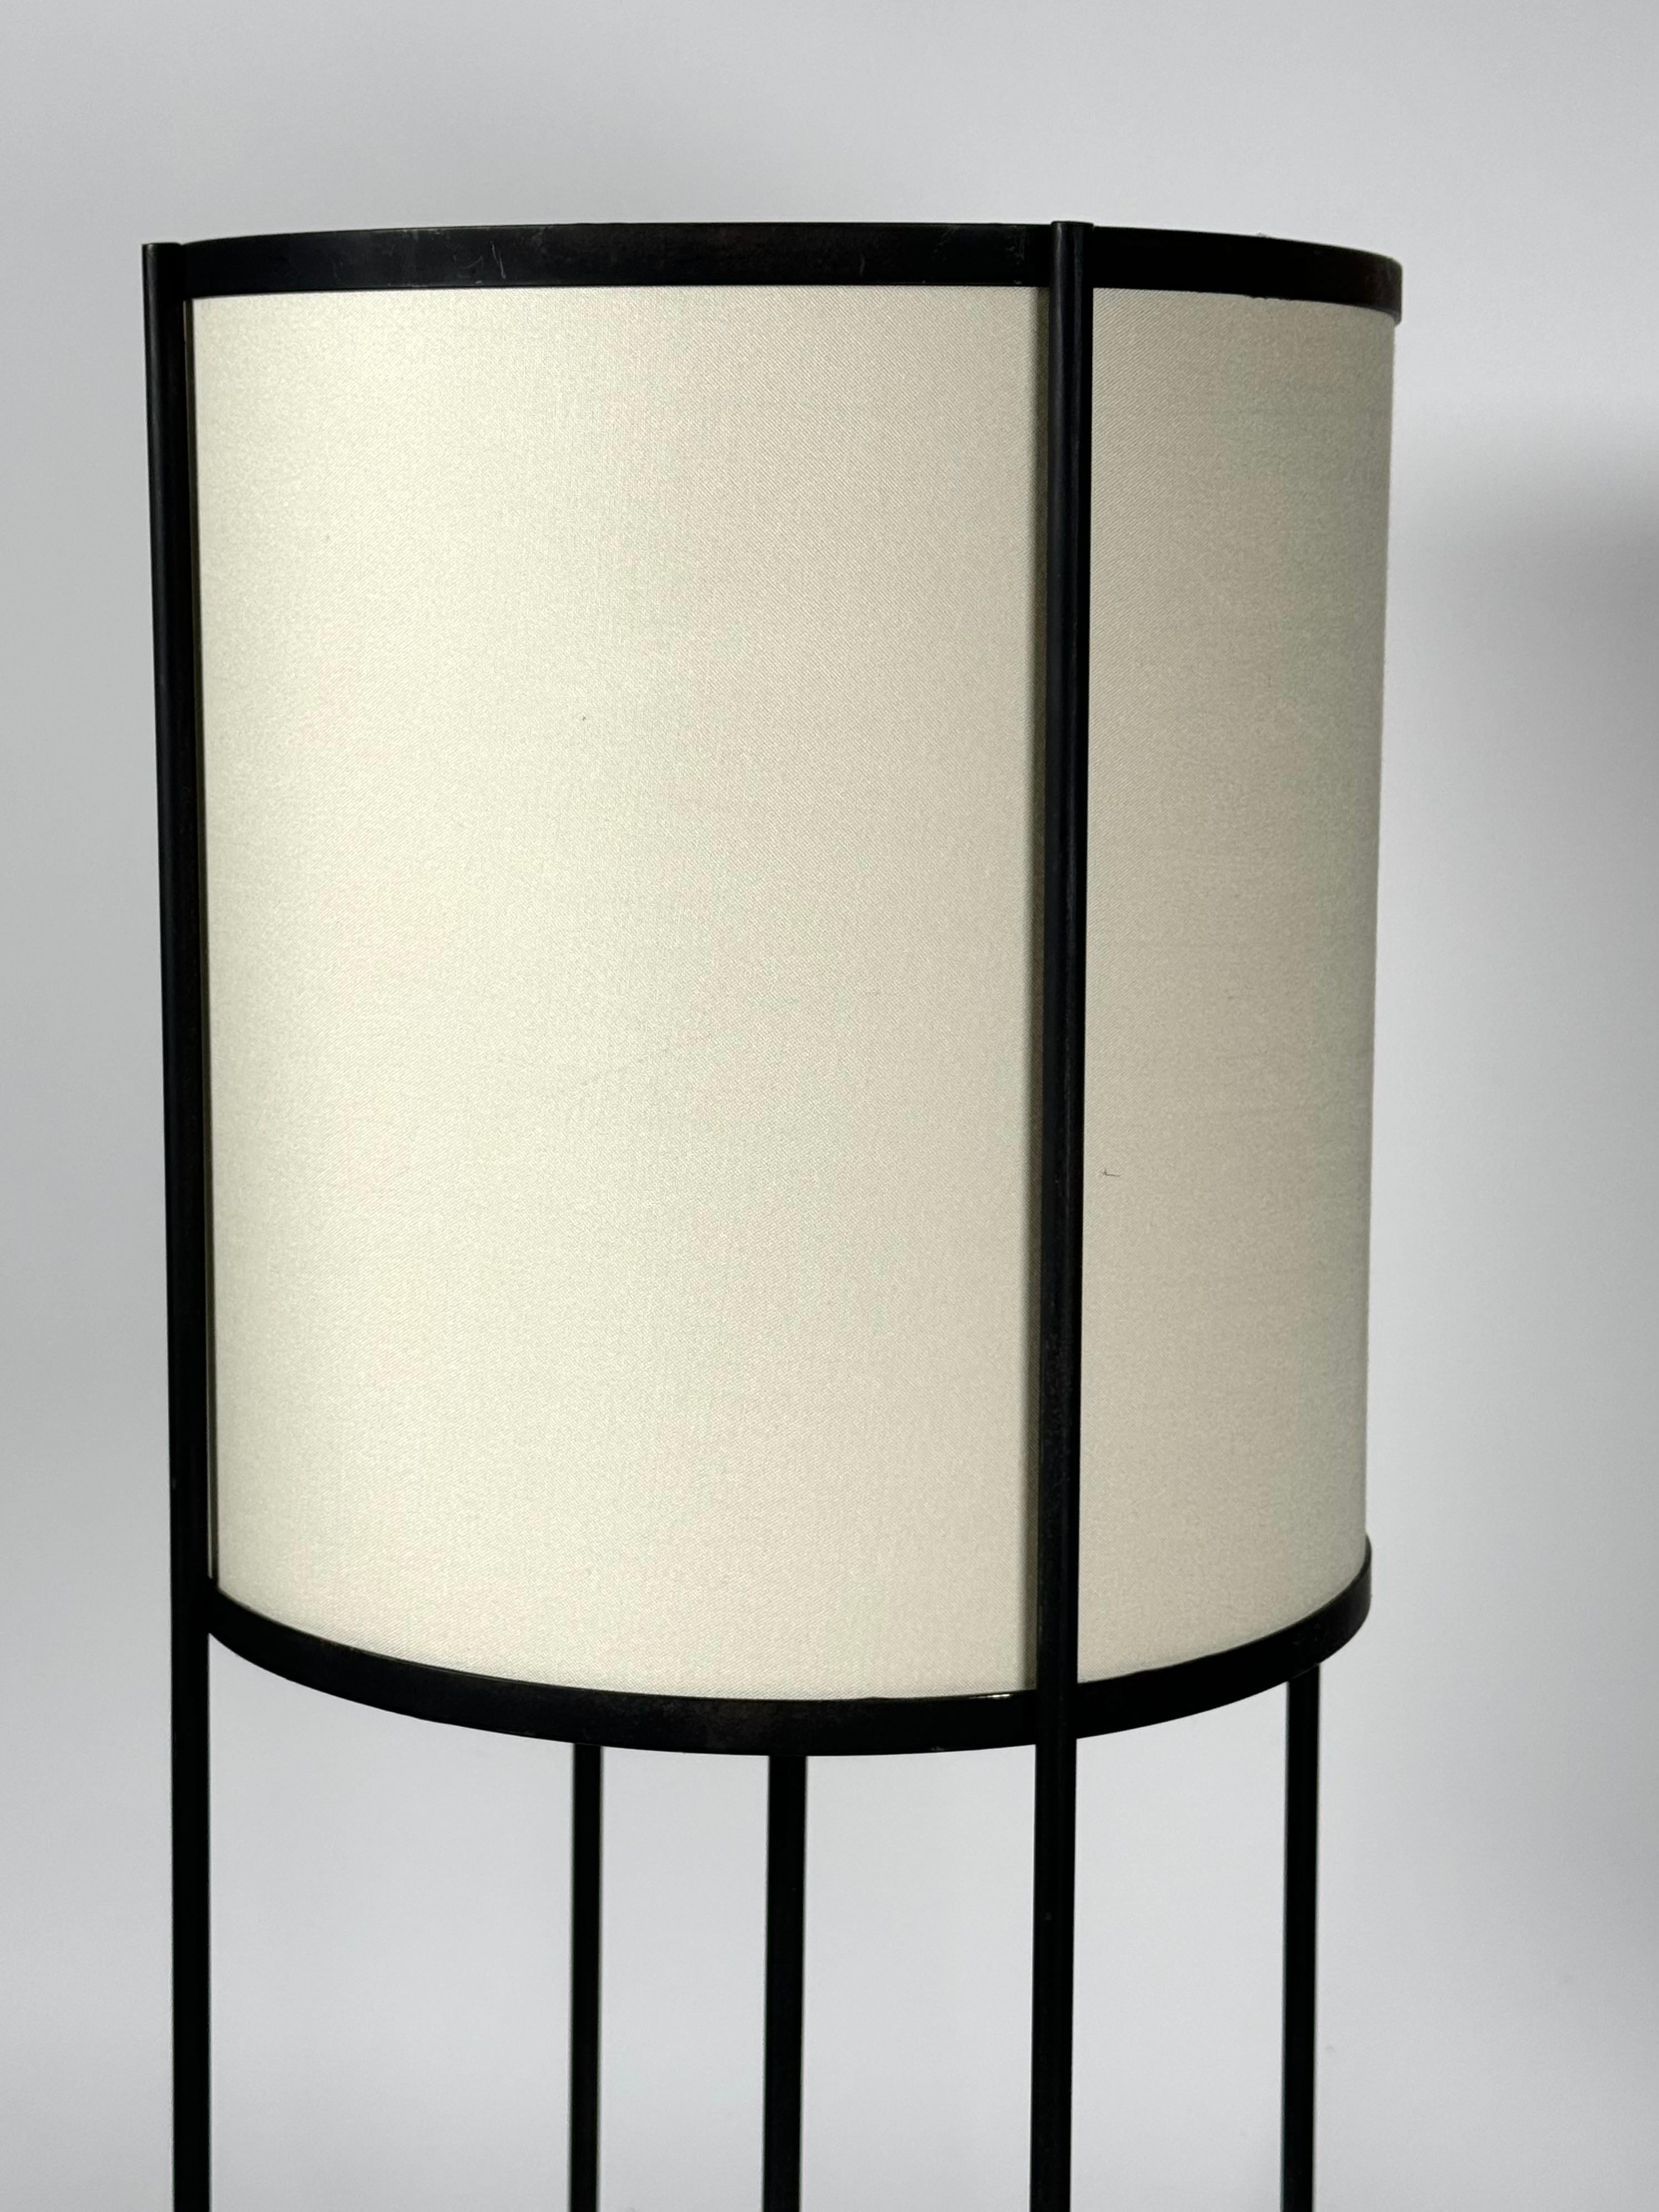 Hand-Crafted California Design Wrought Iron & Linen Table Lamp Circa 1950s #1 For Sale